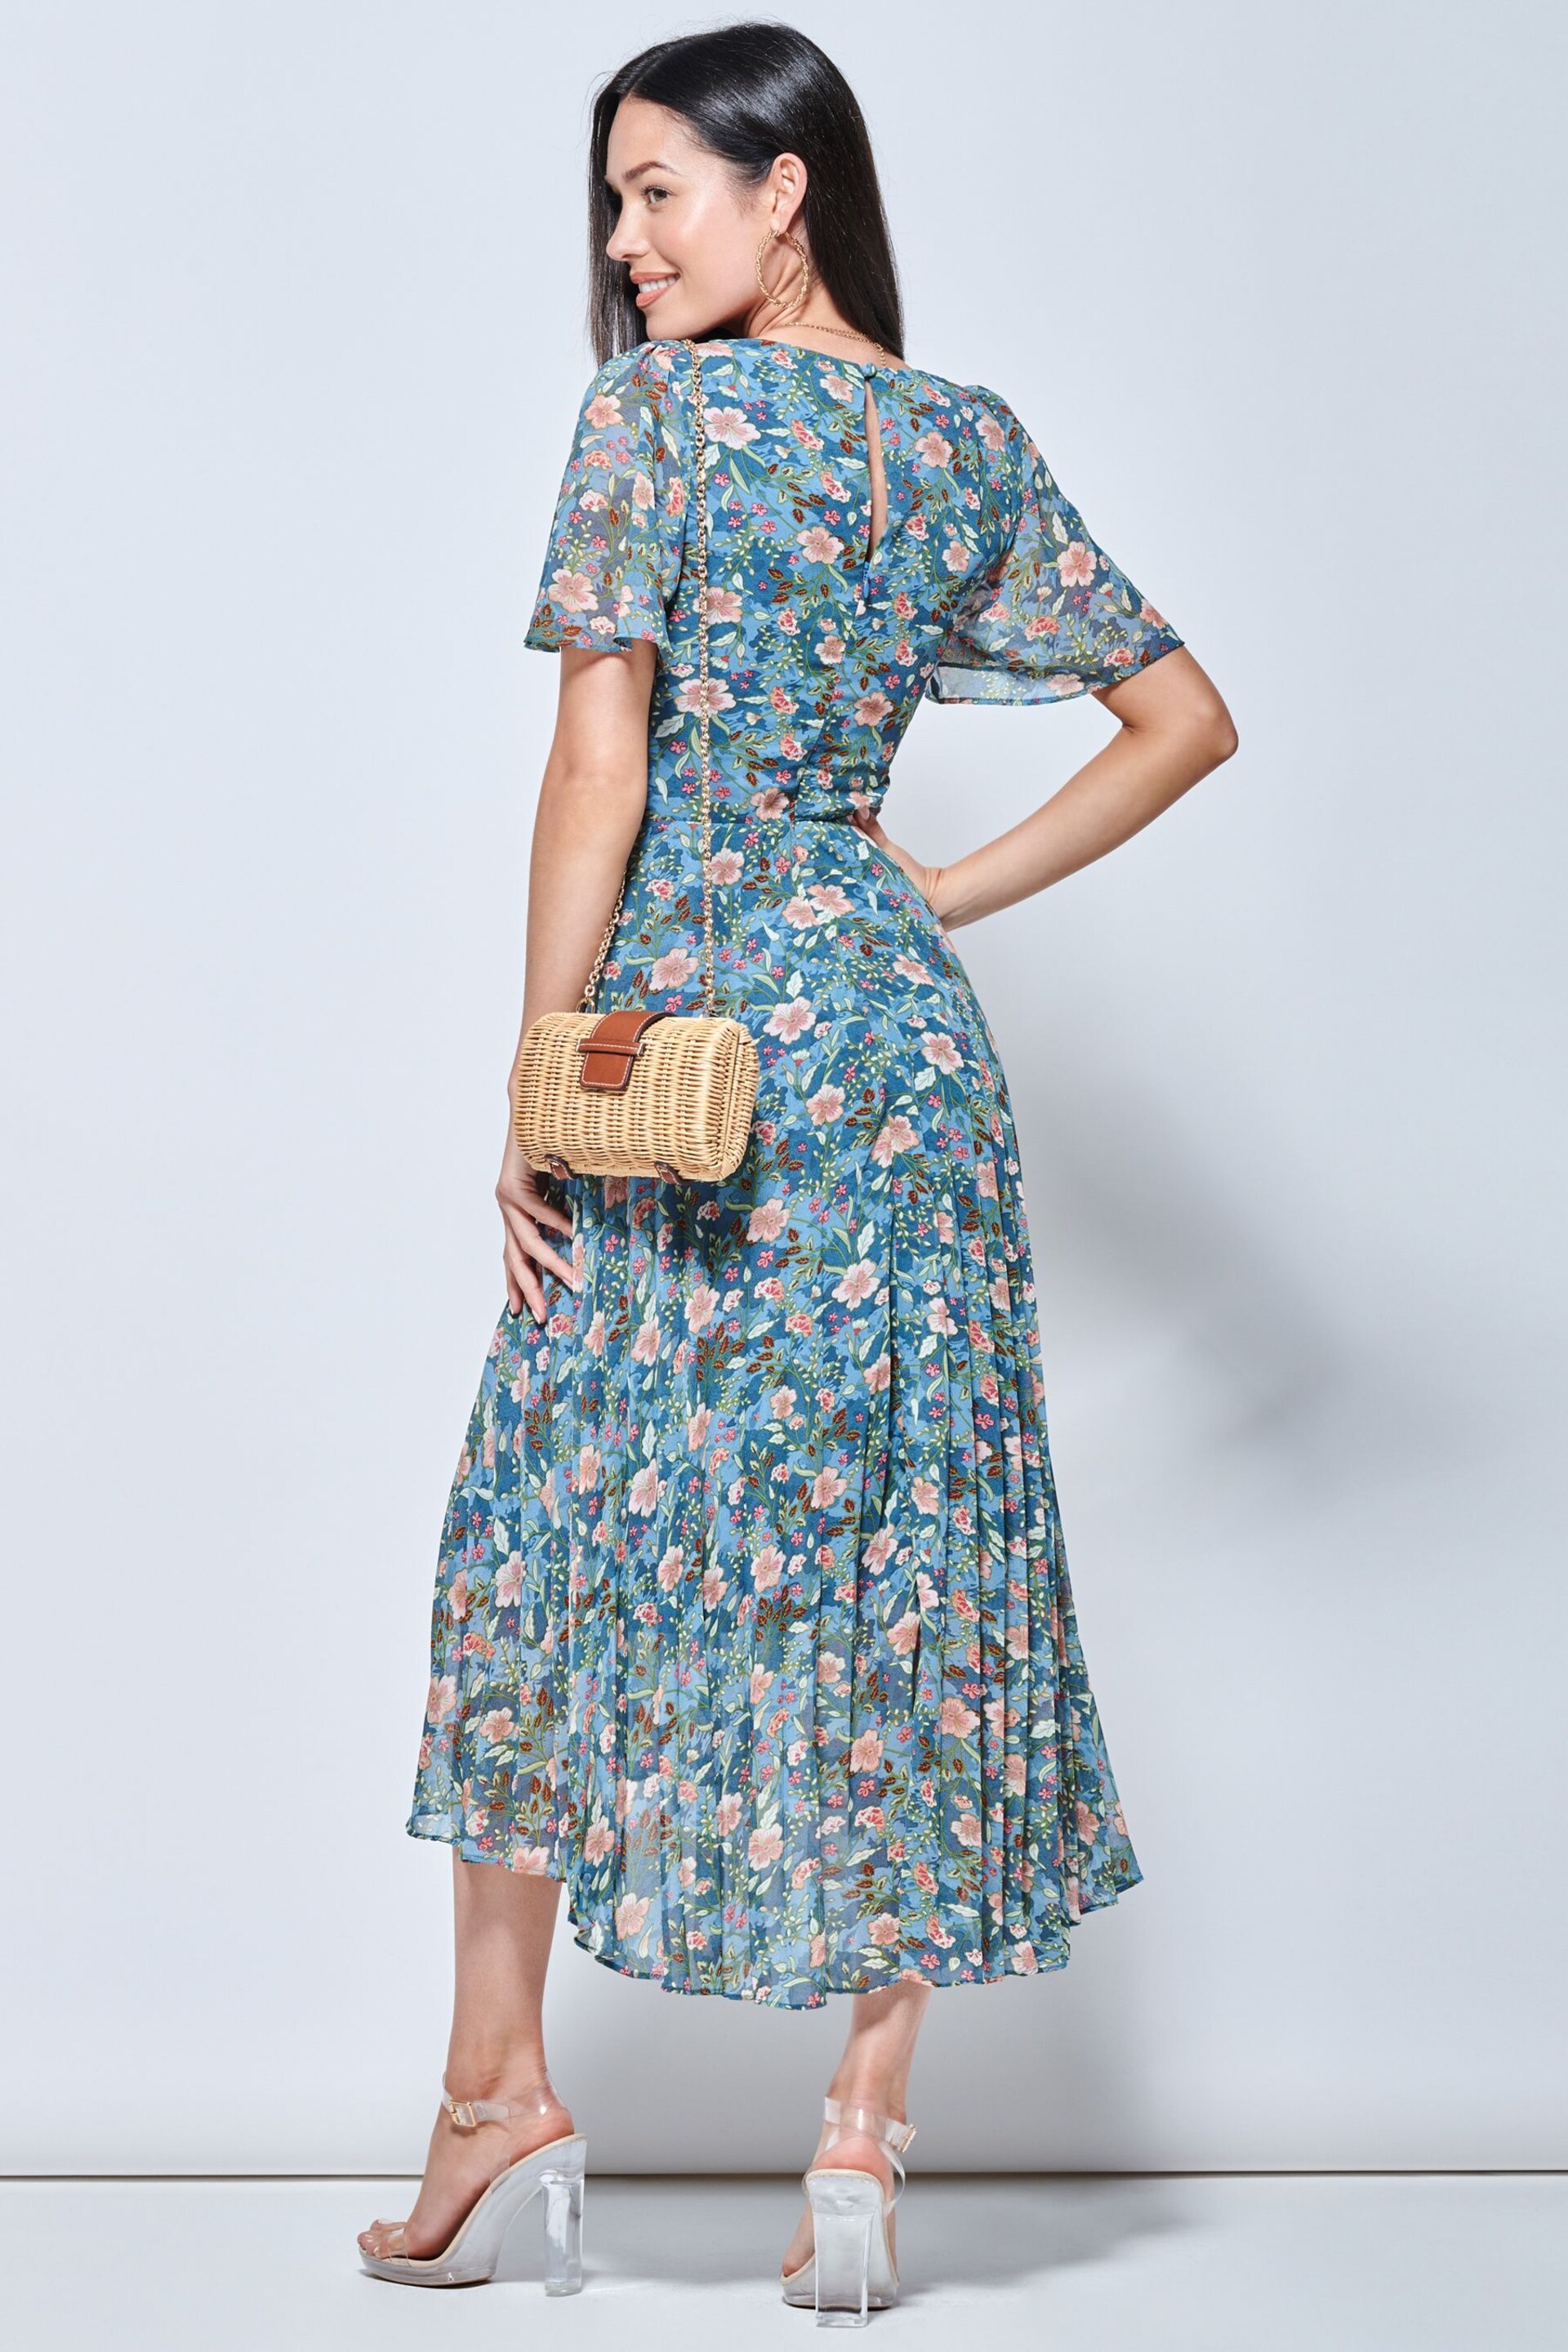 Jolie Moi Blue & Pink Floral Pleated Chiffon High Low Maxi Dress - Image 2 of 5